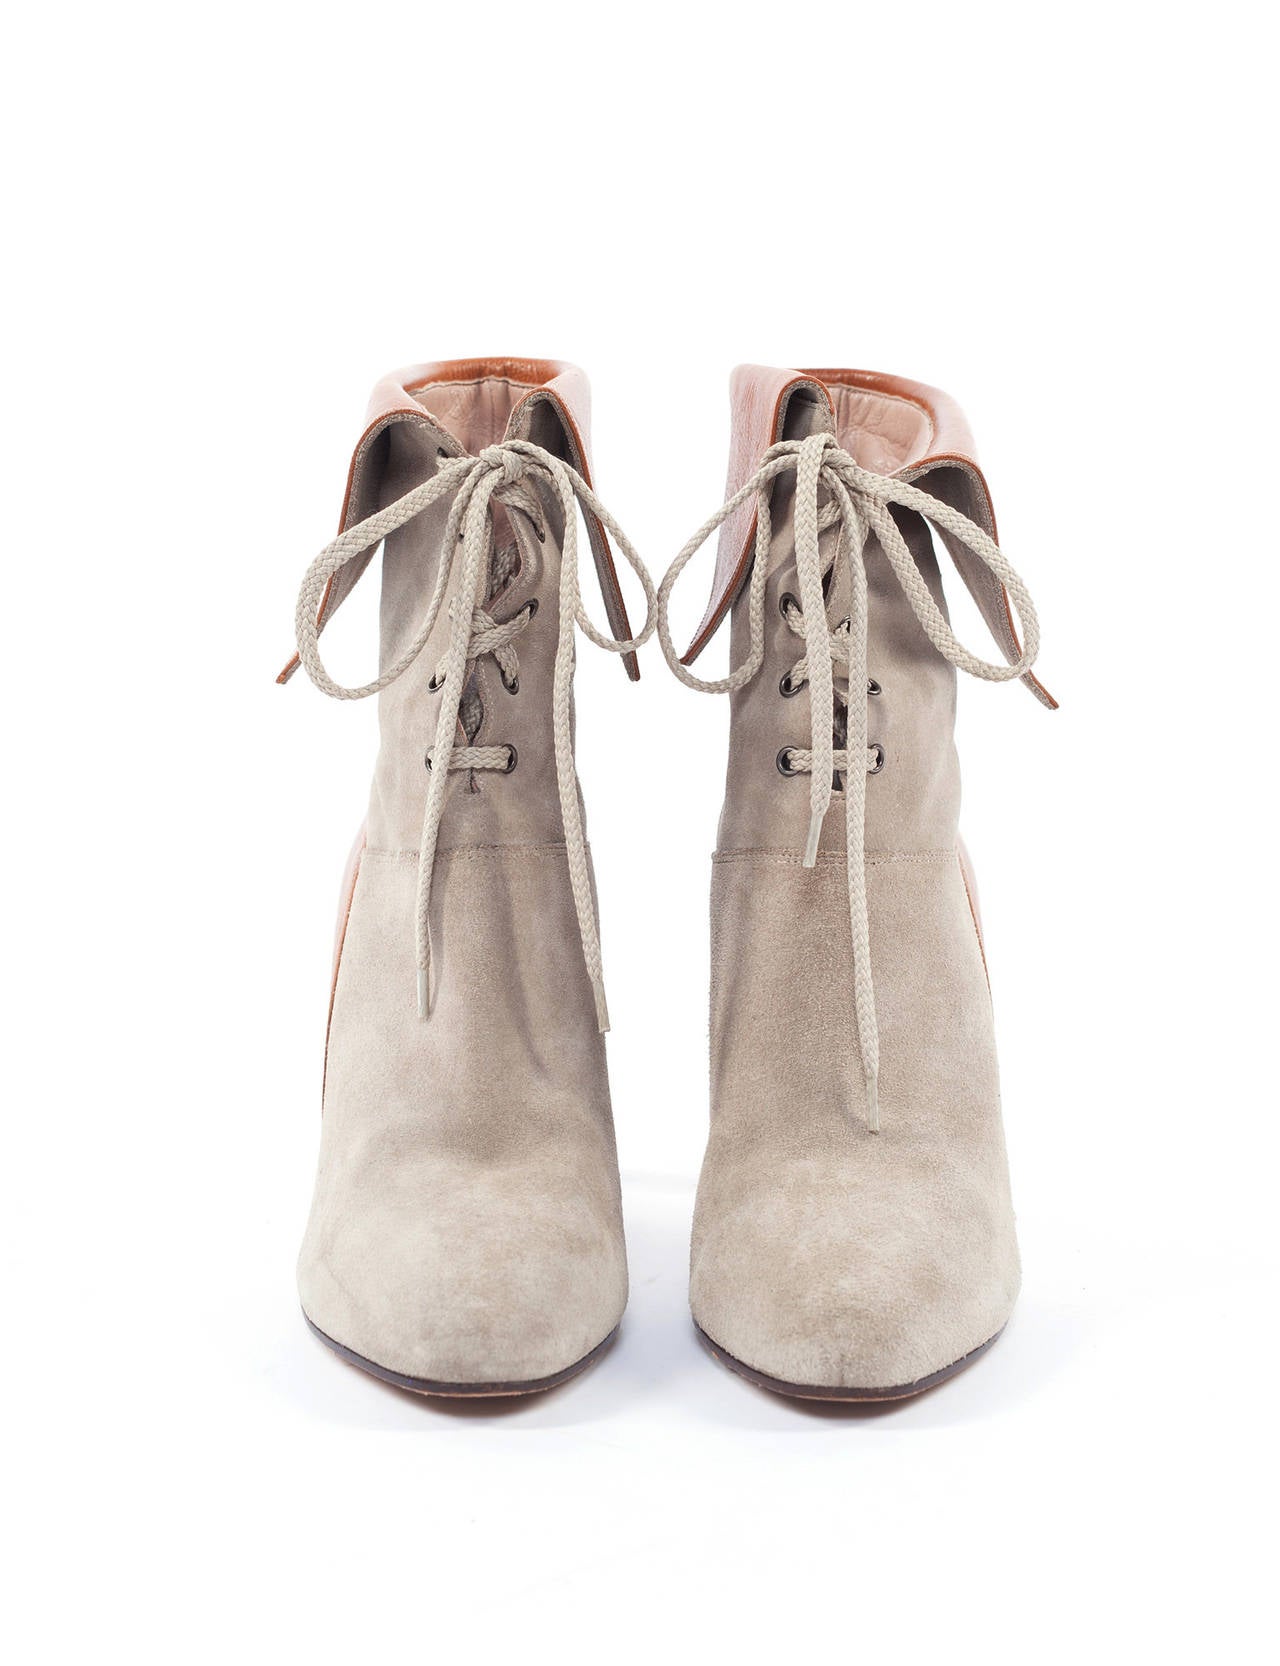 The boots are form the short tenure of Hannah Gibbon for Chloe, Butter soft Suede with contrast Flap and lace up fronts, wooden heel, Part of fashion history at the House of Chloe. US size 8, Eu size 38.